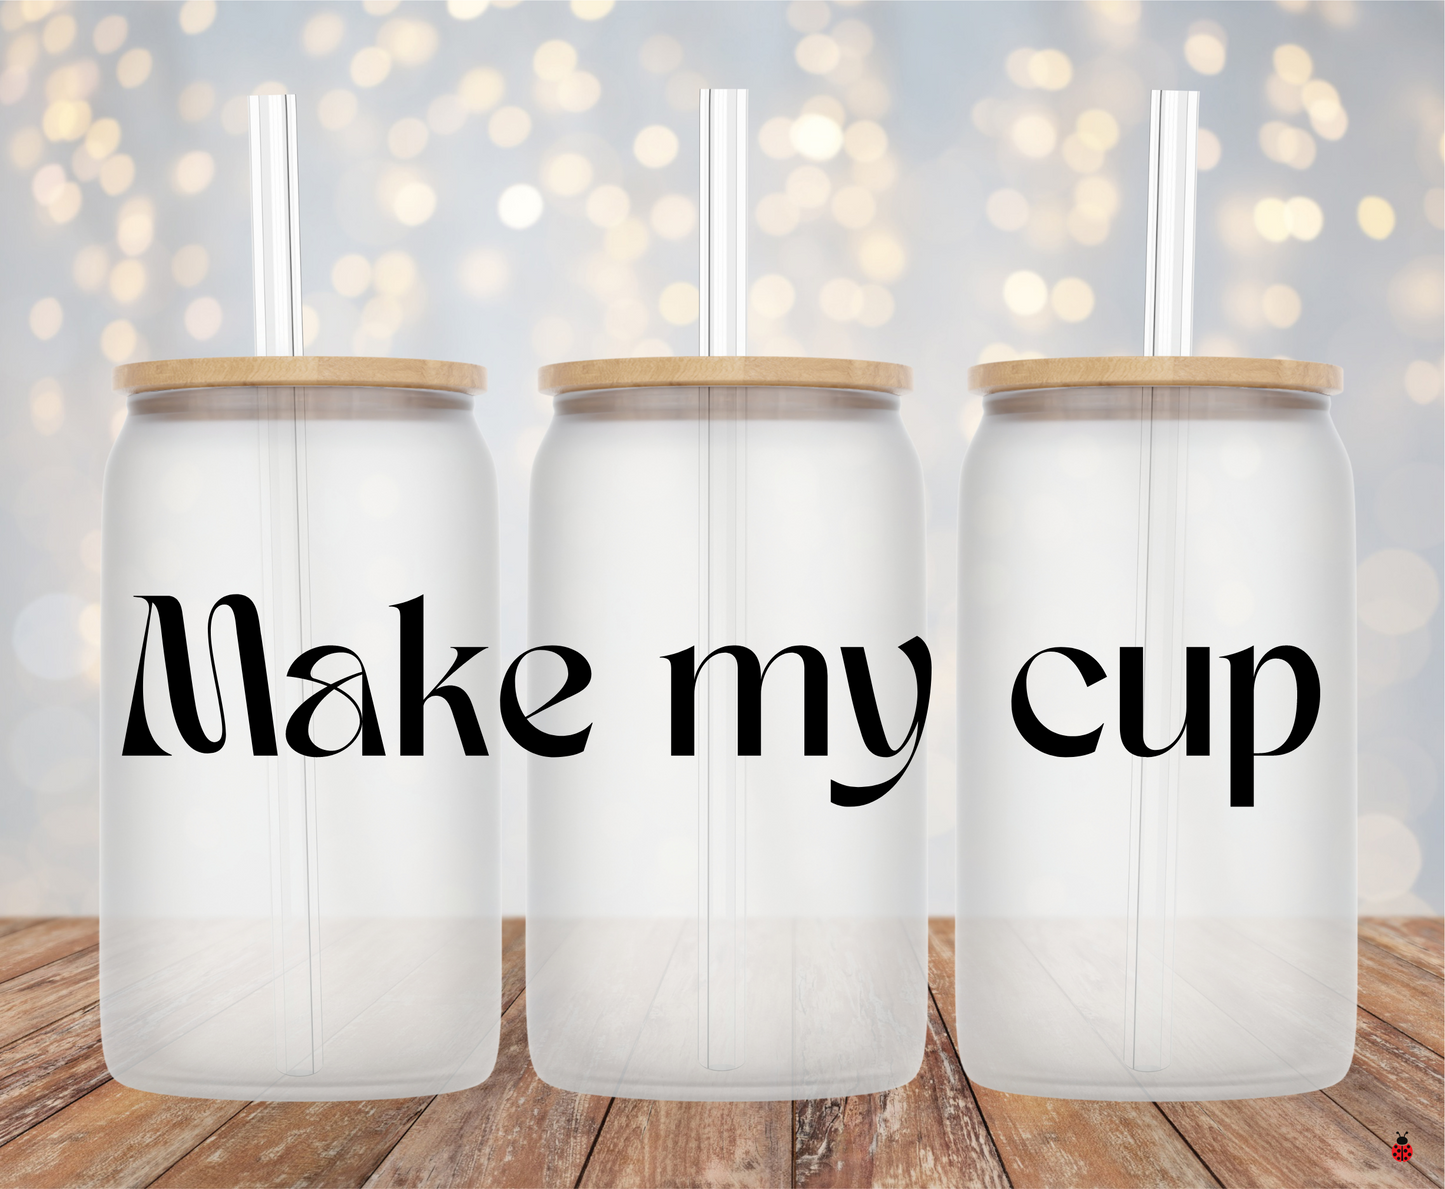 Make my own cup kit